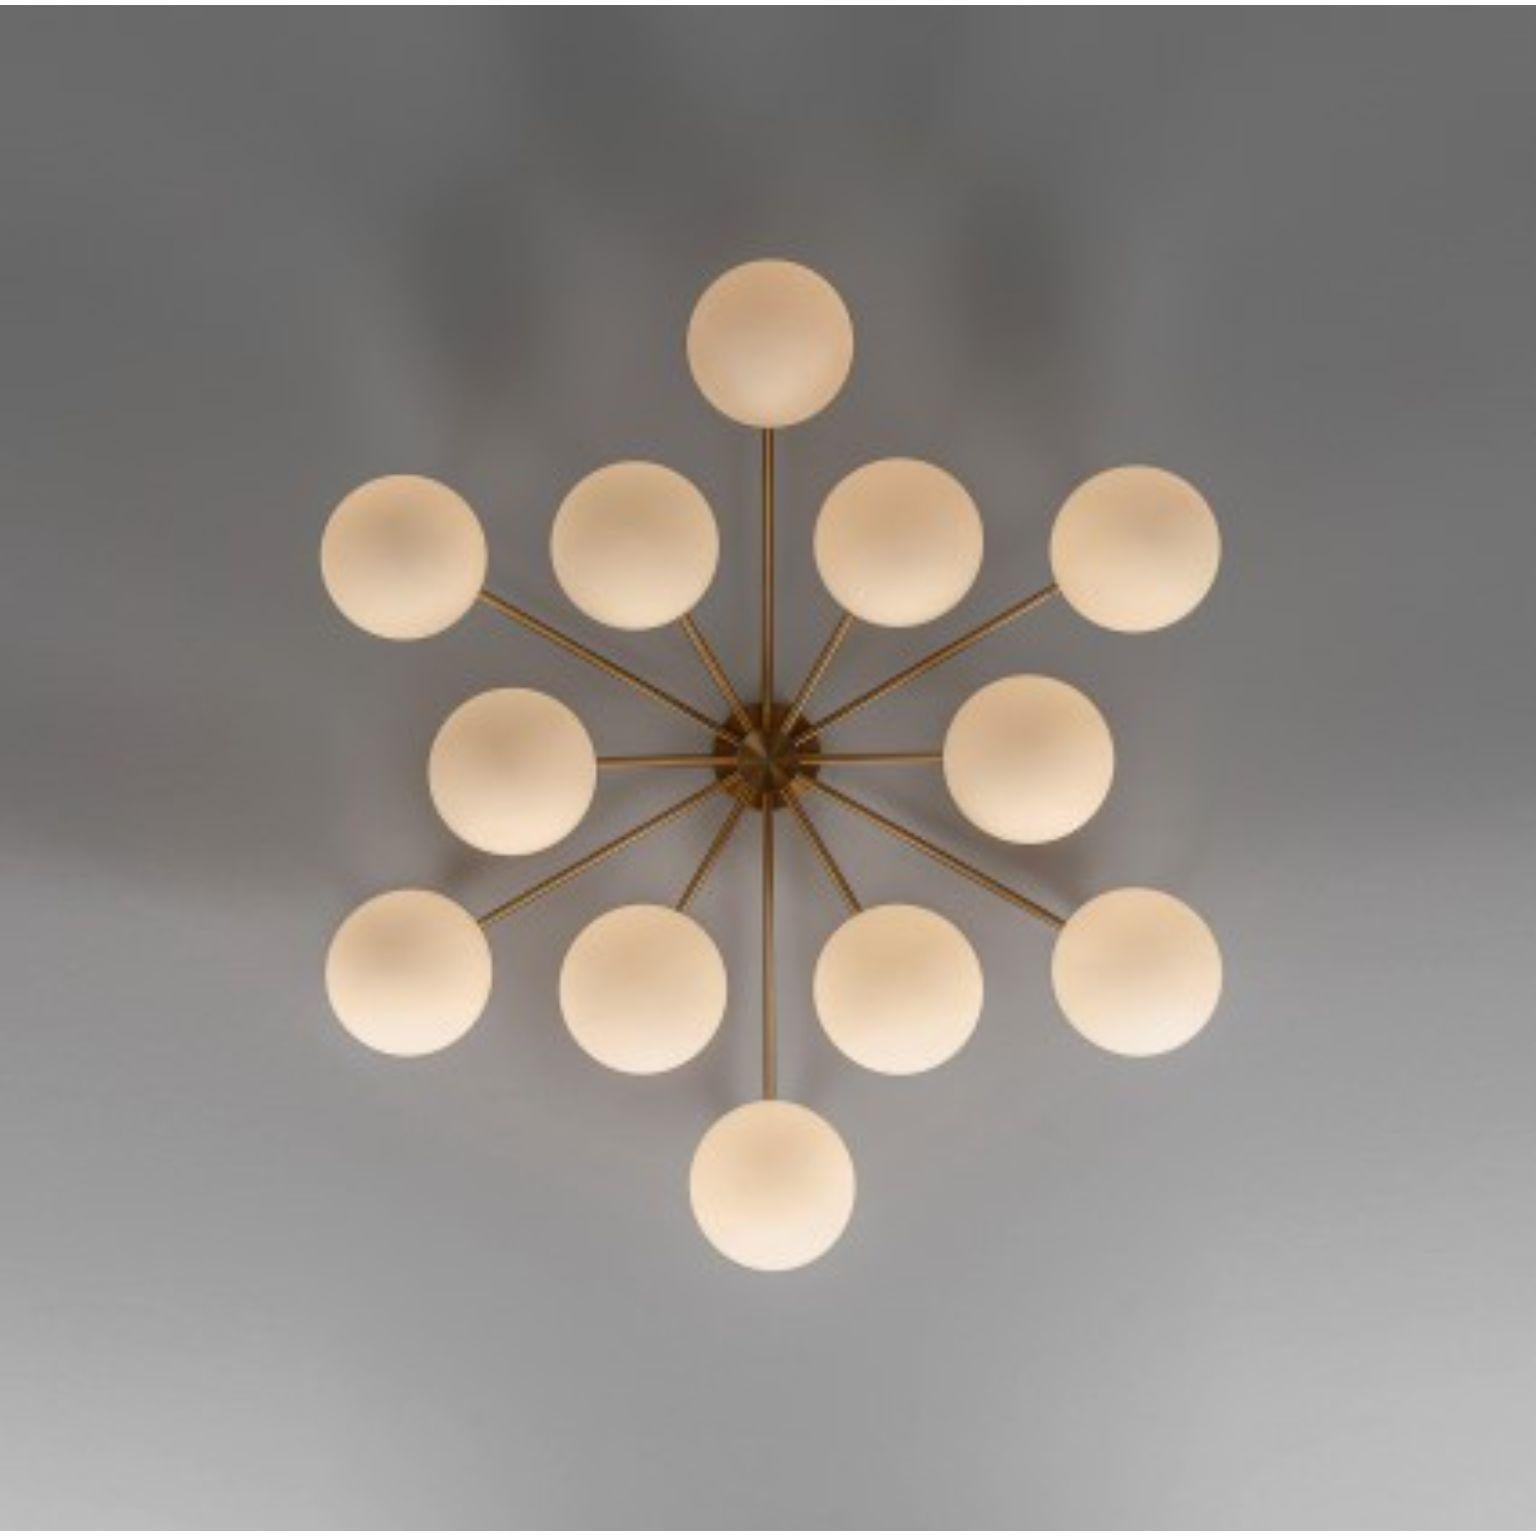 Orion round chandelier by Schwung
Dimensions: D 121.4 x H 122.5cm
Materials: Brass, Opal glass
Weight: 22.6 kg

Finishes available: Black gunmetal, polished nickel, brass
Other sizes available.

 Schwung is a german word, and loosely